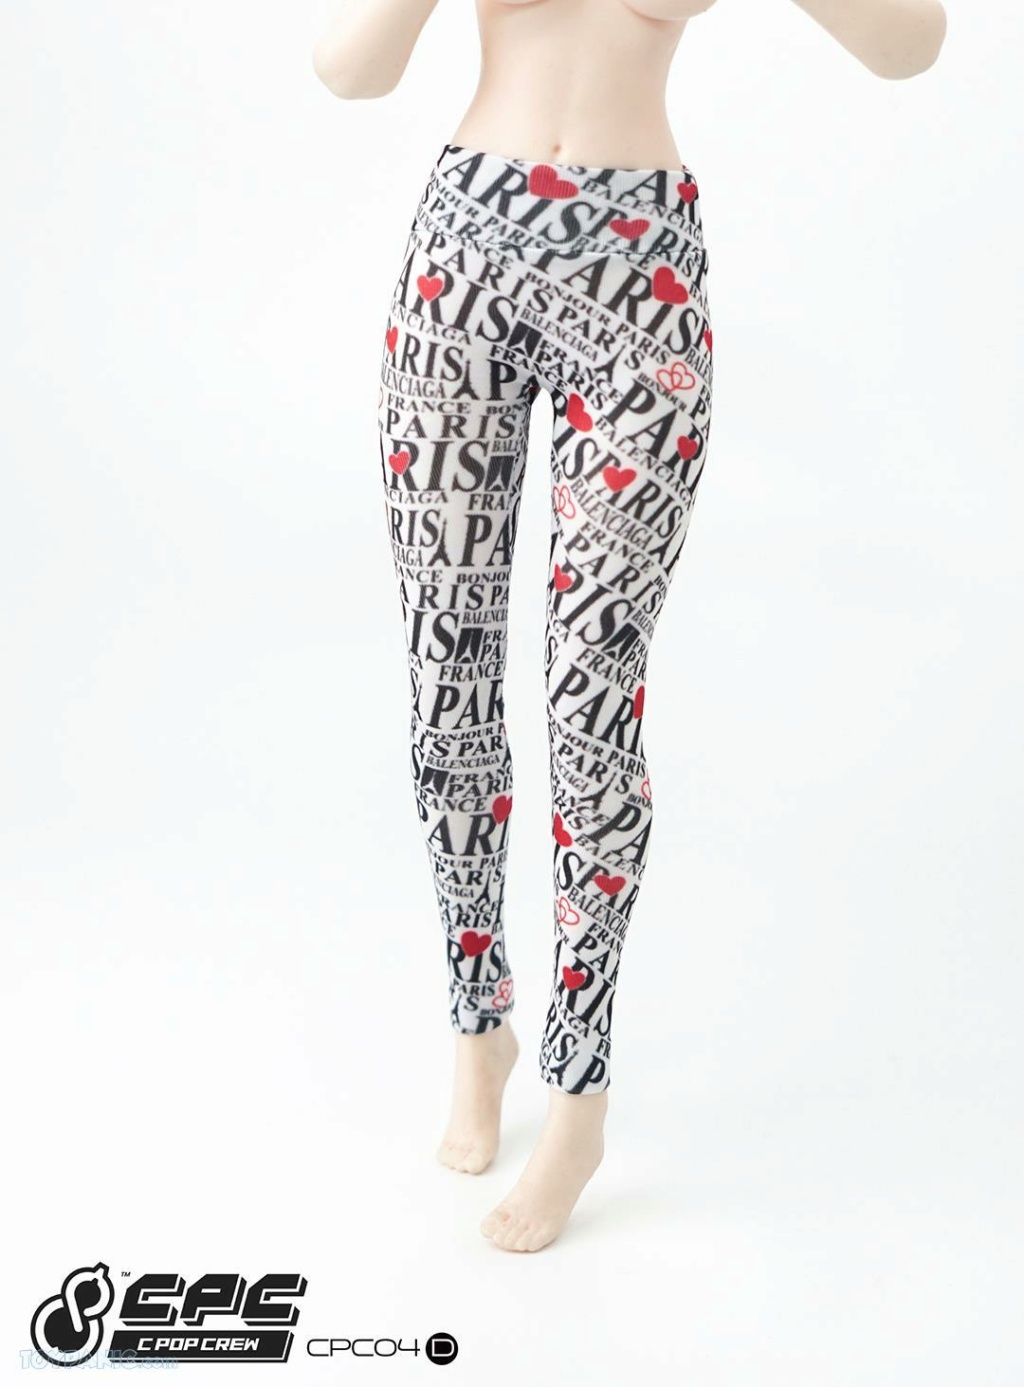 clothing - NEW PRODUCT: CPop Crew: 1/6 Female Ice Silk Printed Yoga Pants (5 styles) 14720224